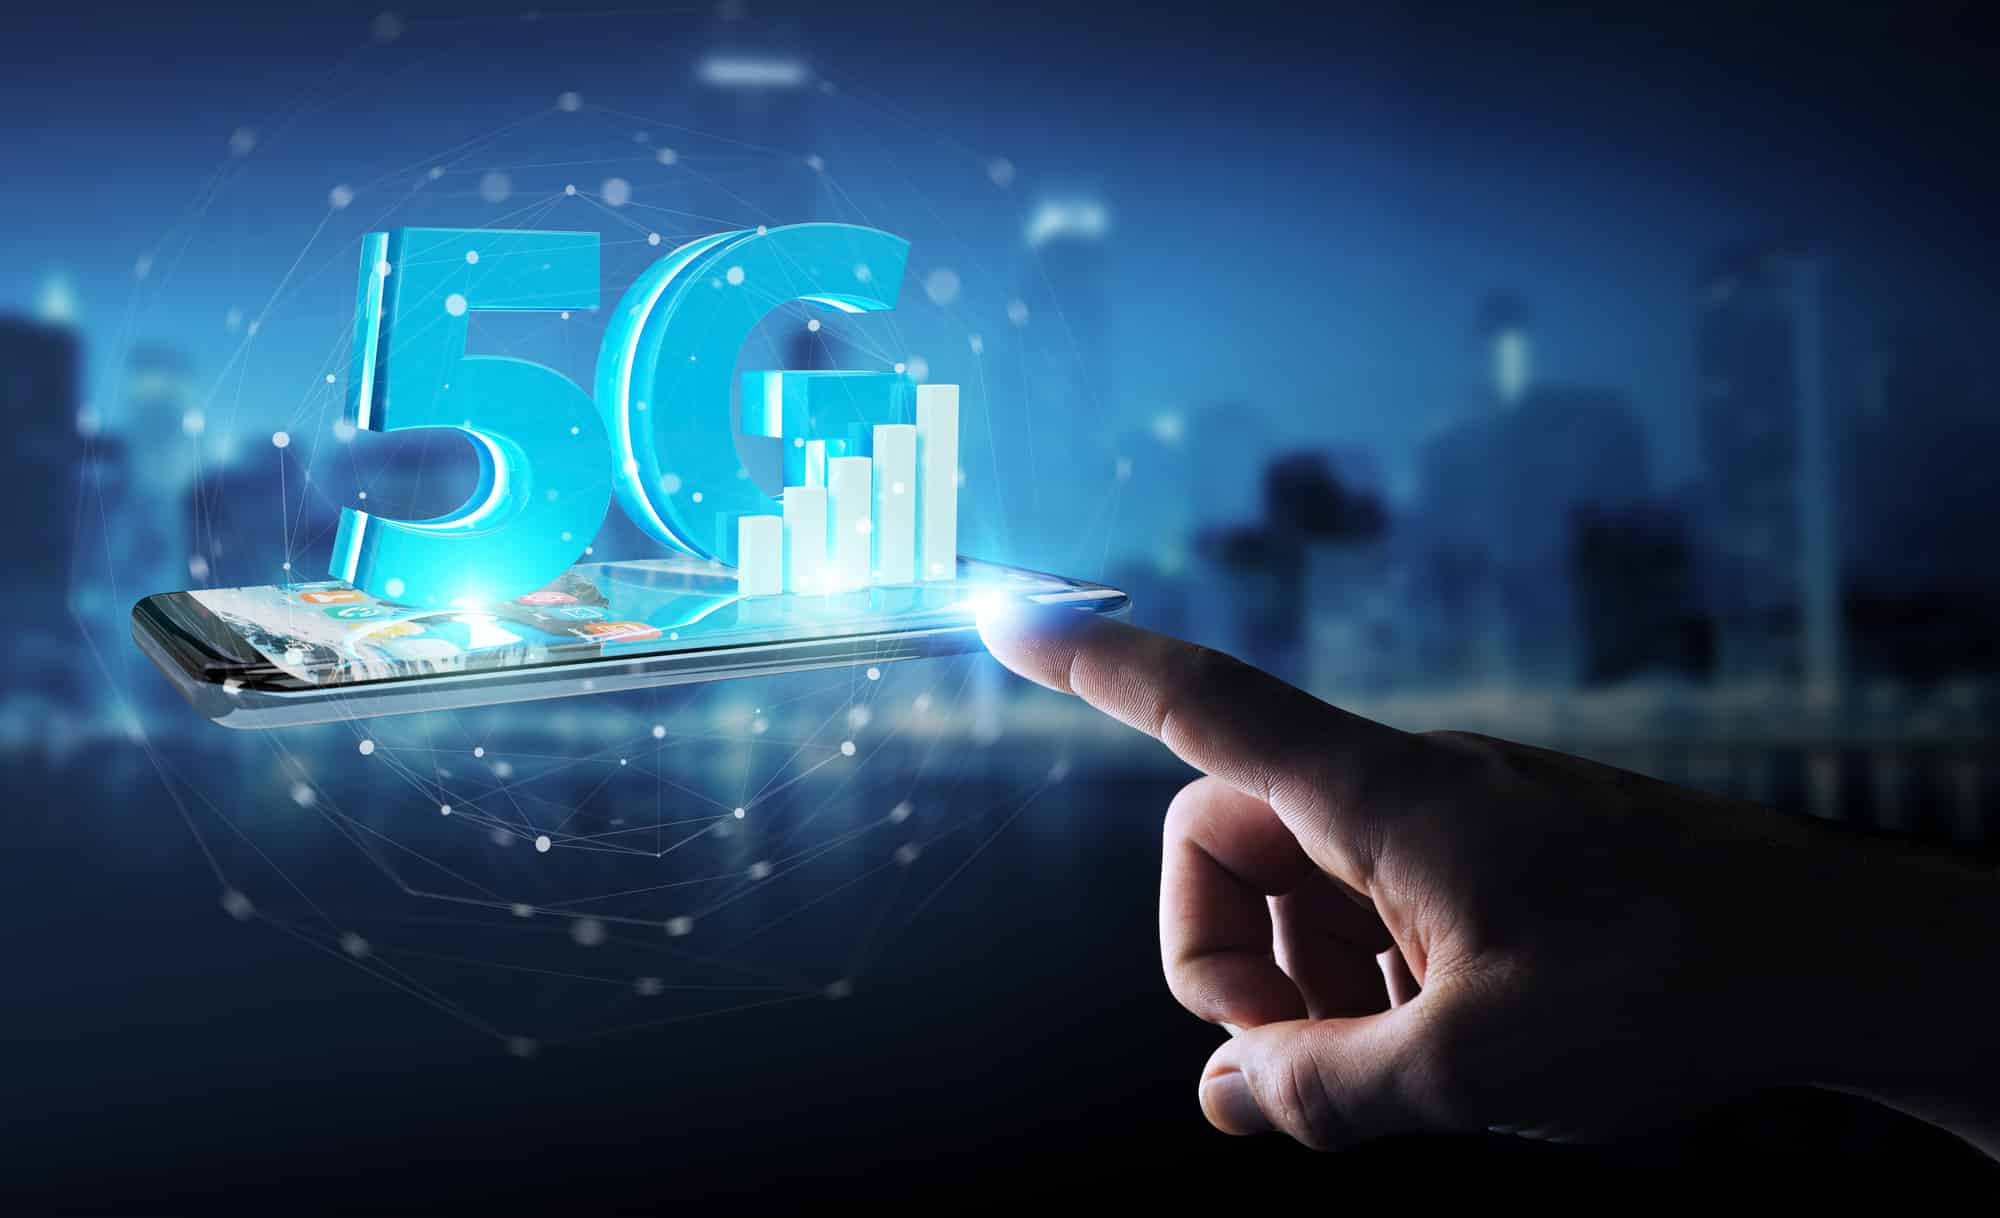 5G will also arrive in space thanks to Ericsson, Qualcomm and Thales thumbnail